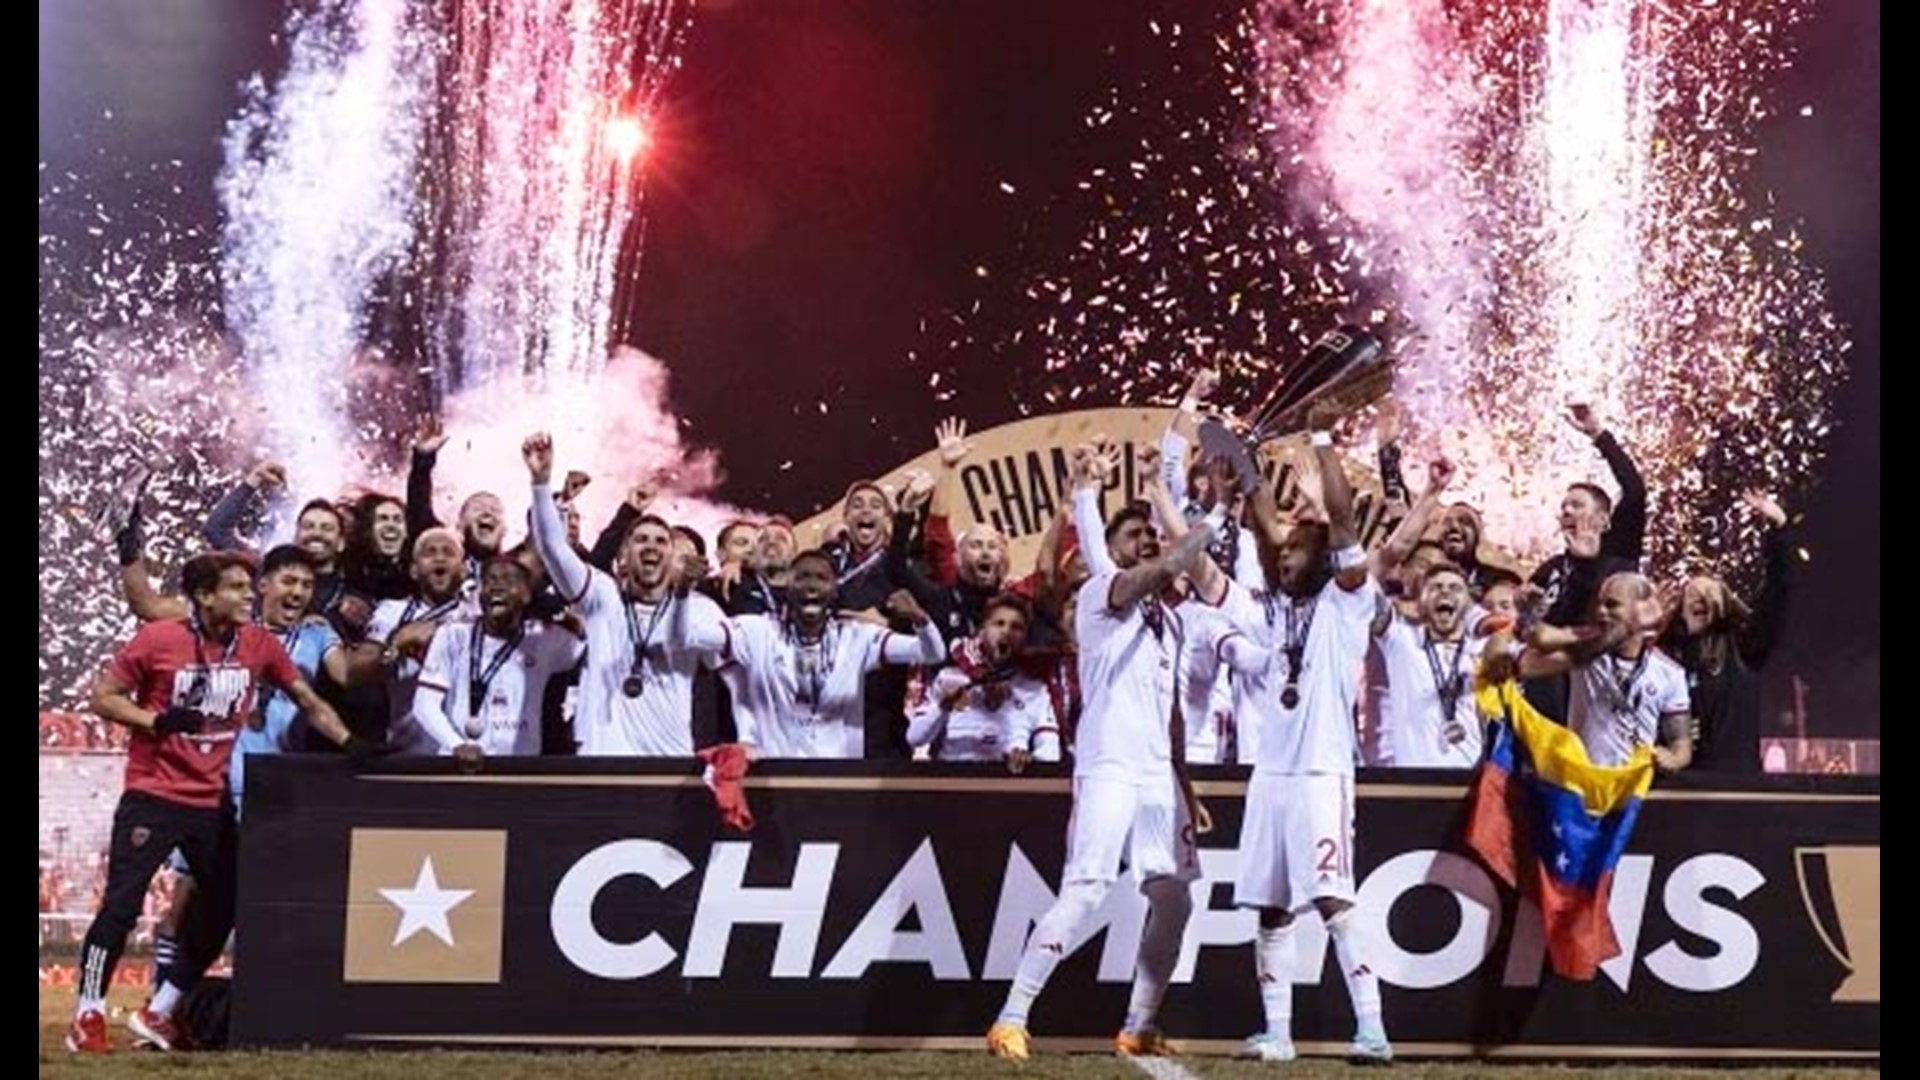 Phoenix Rising FC beat the Charleston Battery, 3-2 in kicks, on Sunday securing their spot at the top of the United Soccer League.